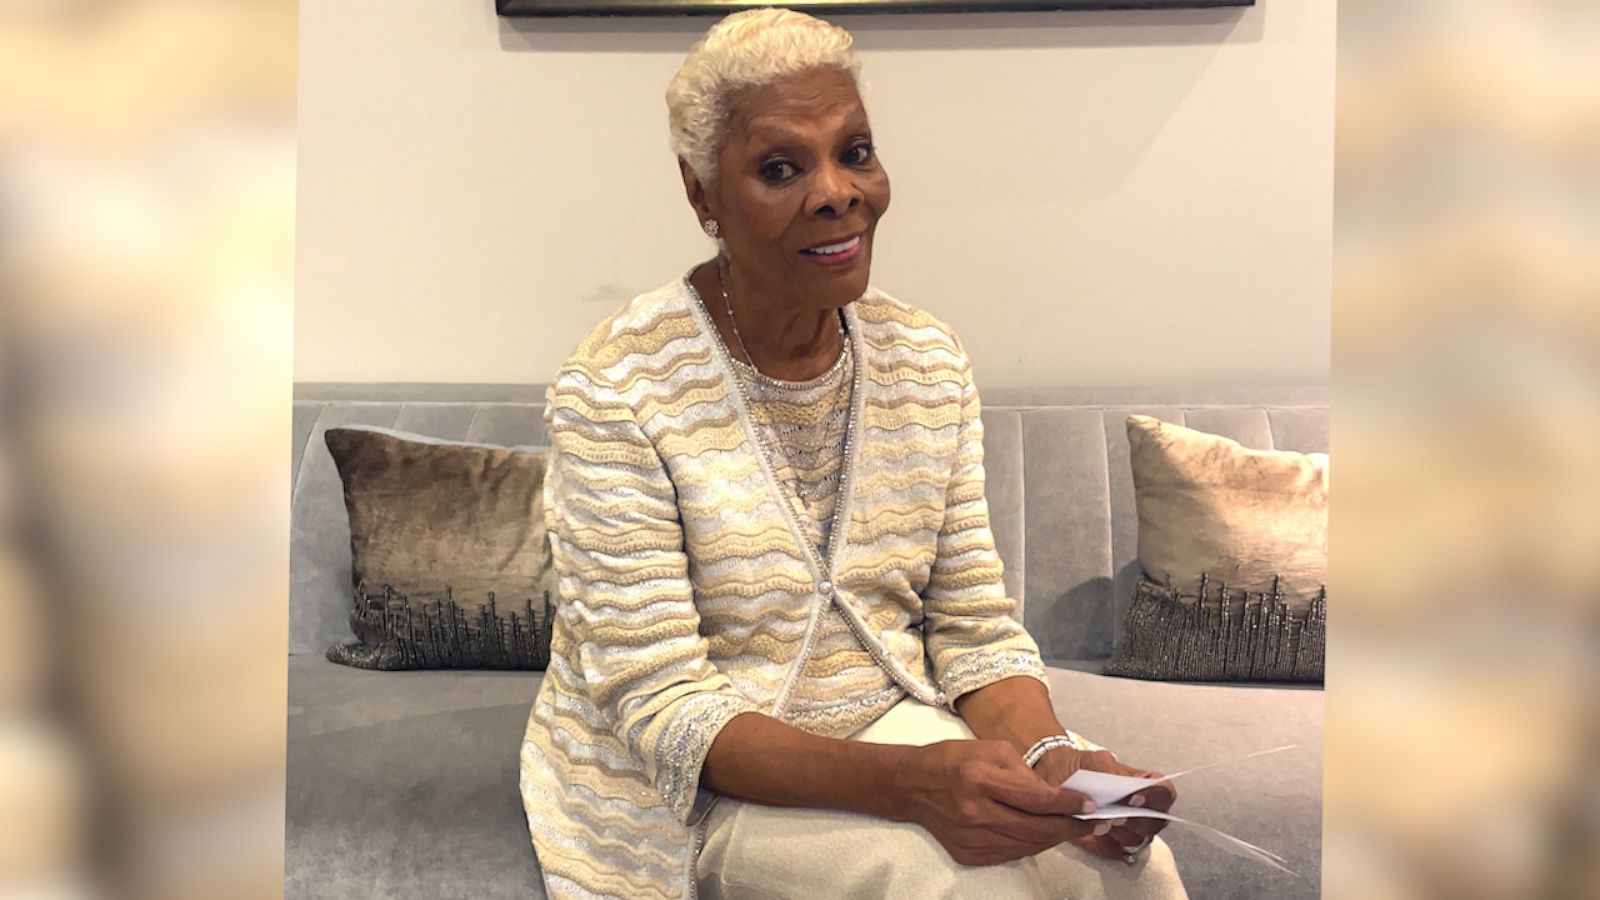 VIDEO: Dionne Warwick reacts to her iconic tweets